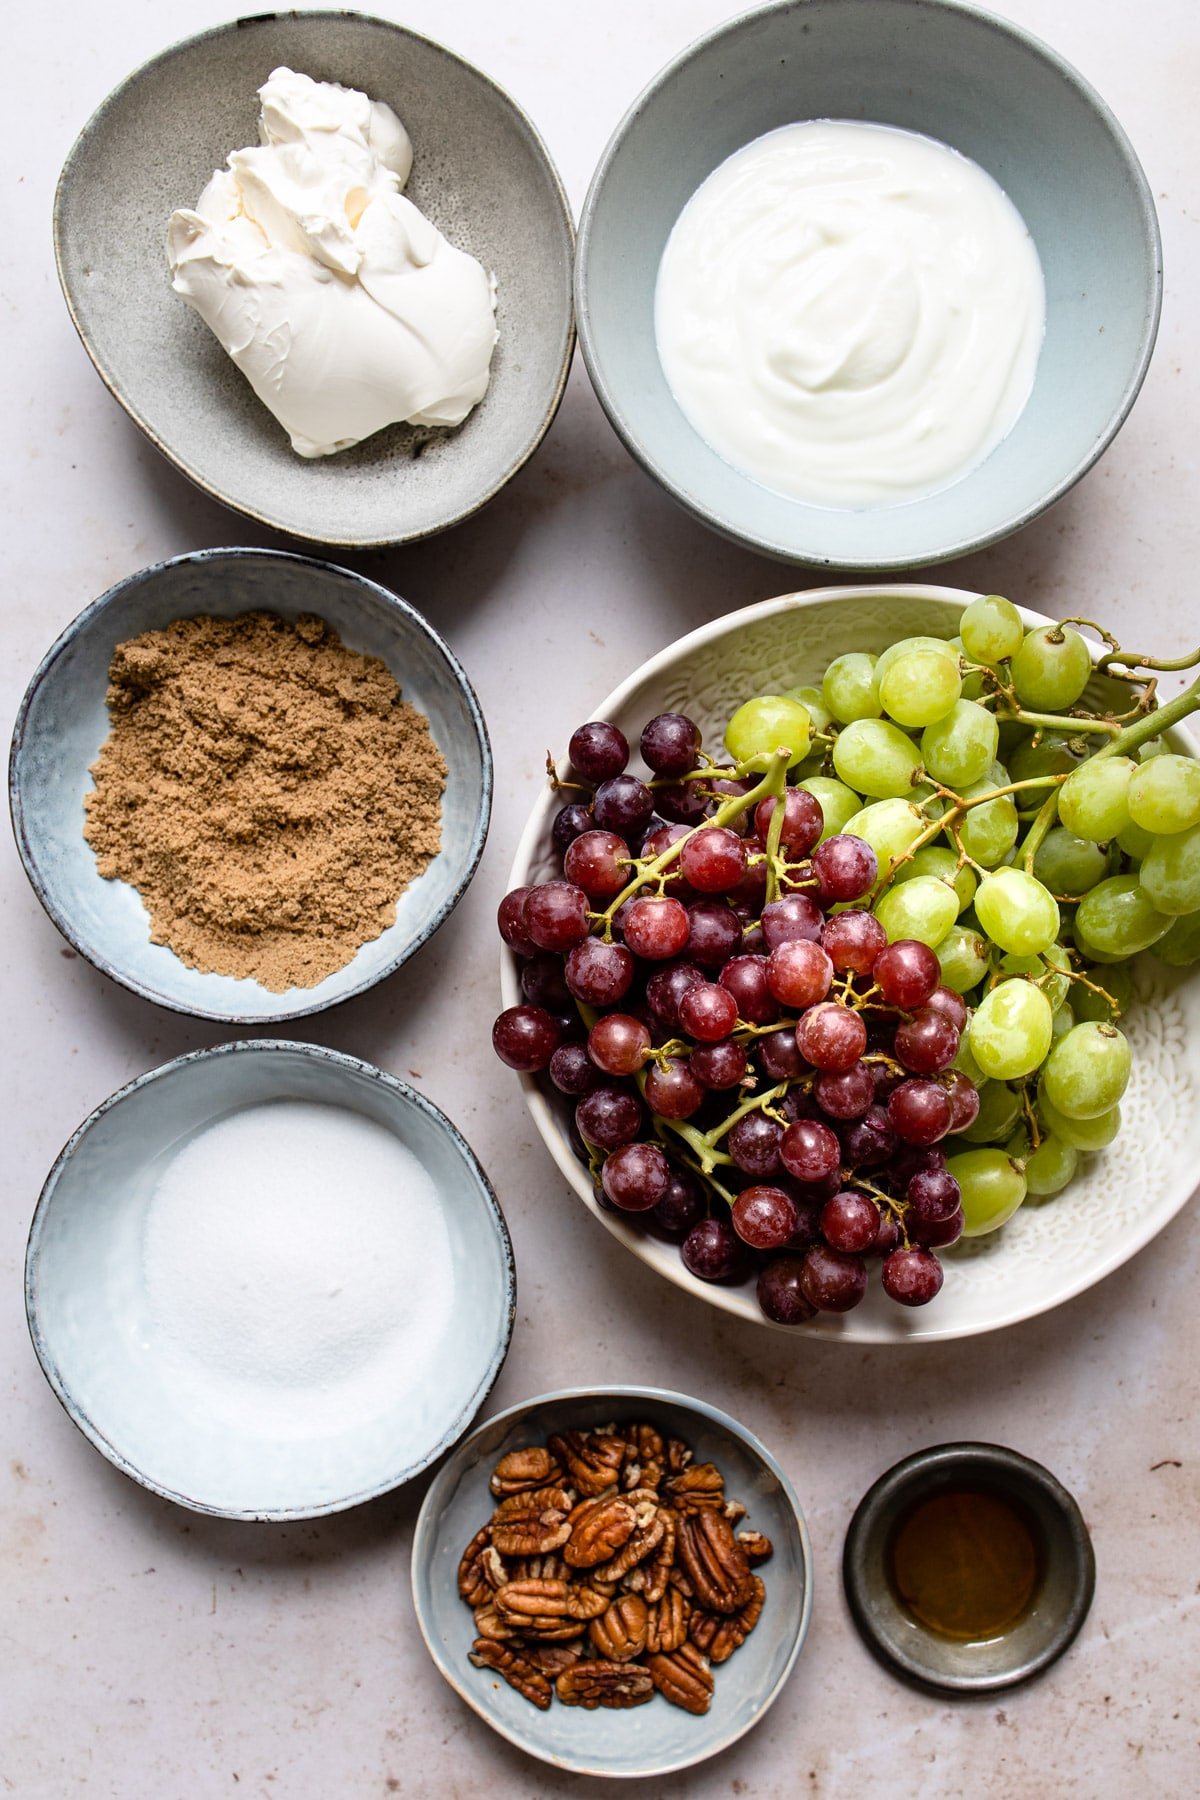 Ingredients for grape salad on plates and in bowls. 